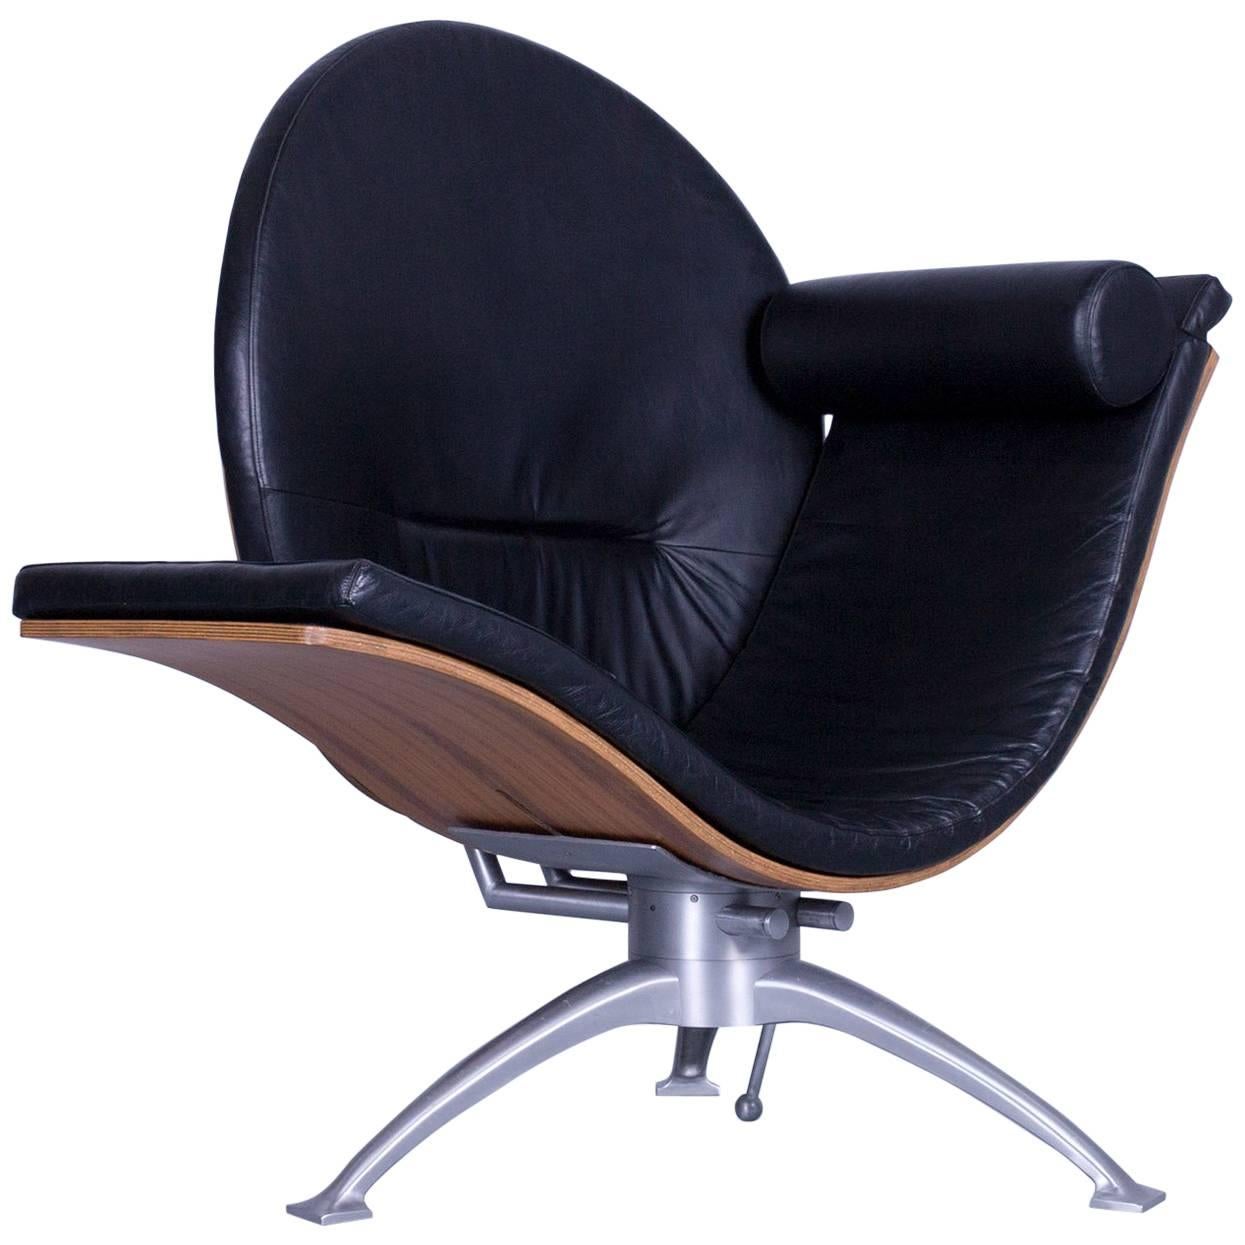 Designer Leather Lounge Chair Black Function Wood